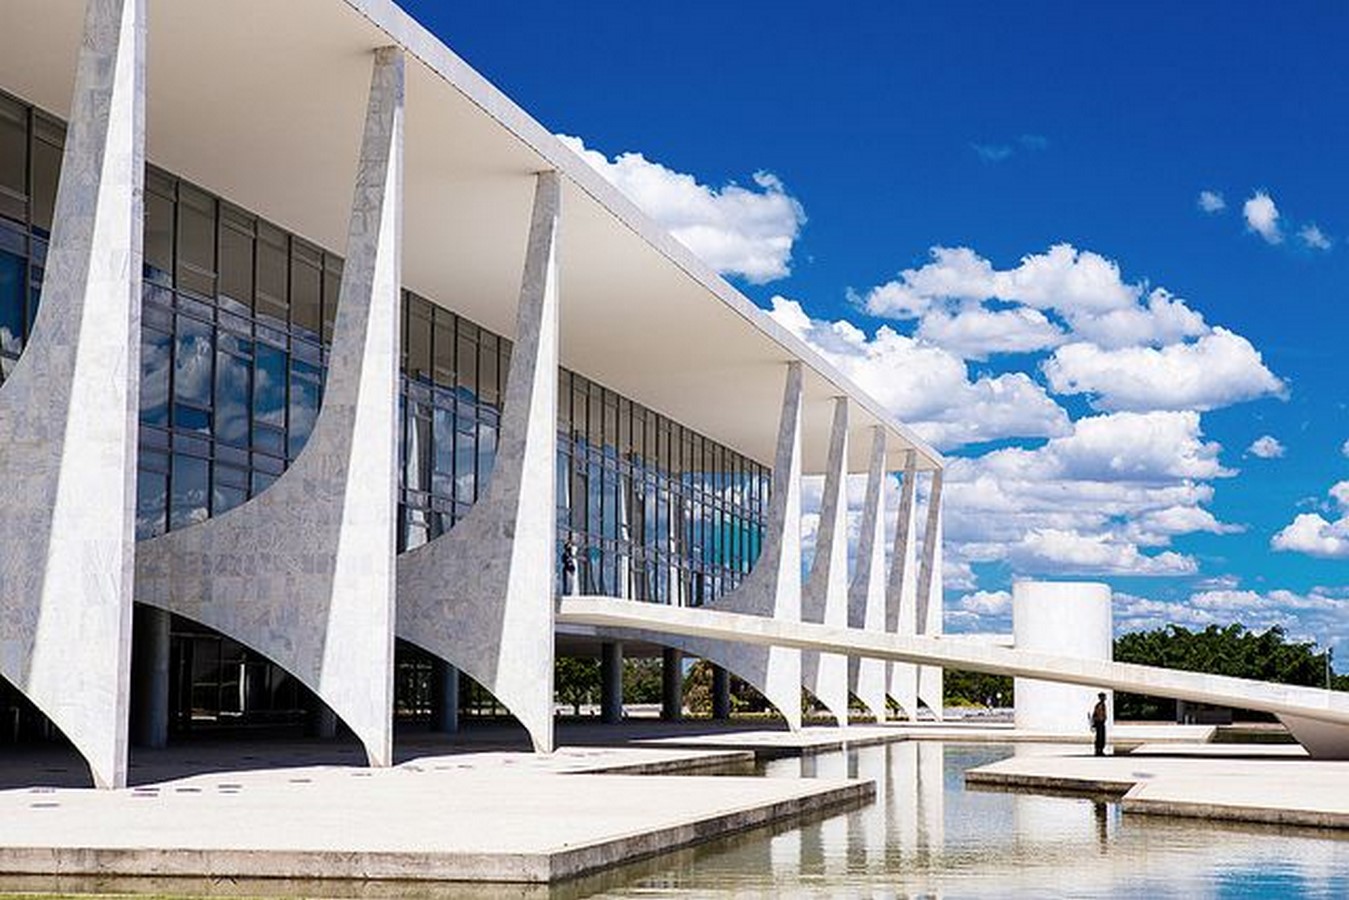 10 Things you did not know about Brasília, Brazil Sheet13